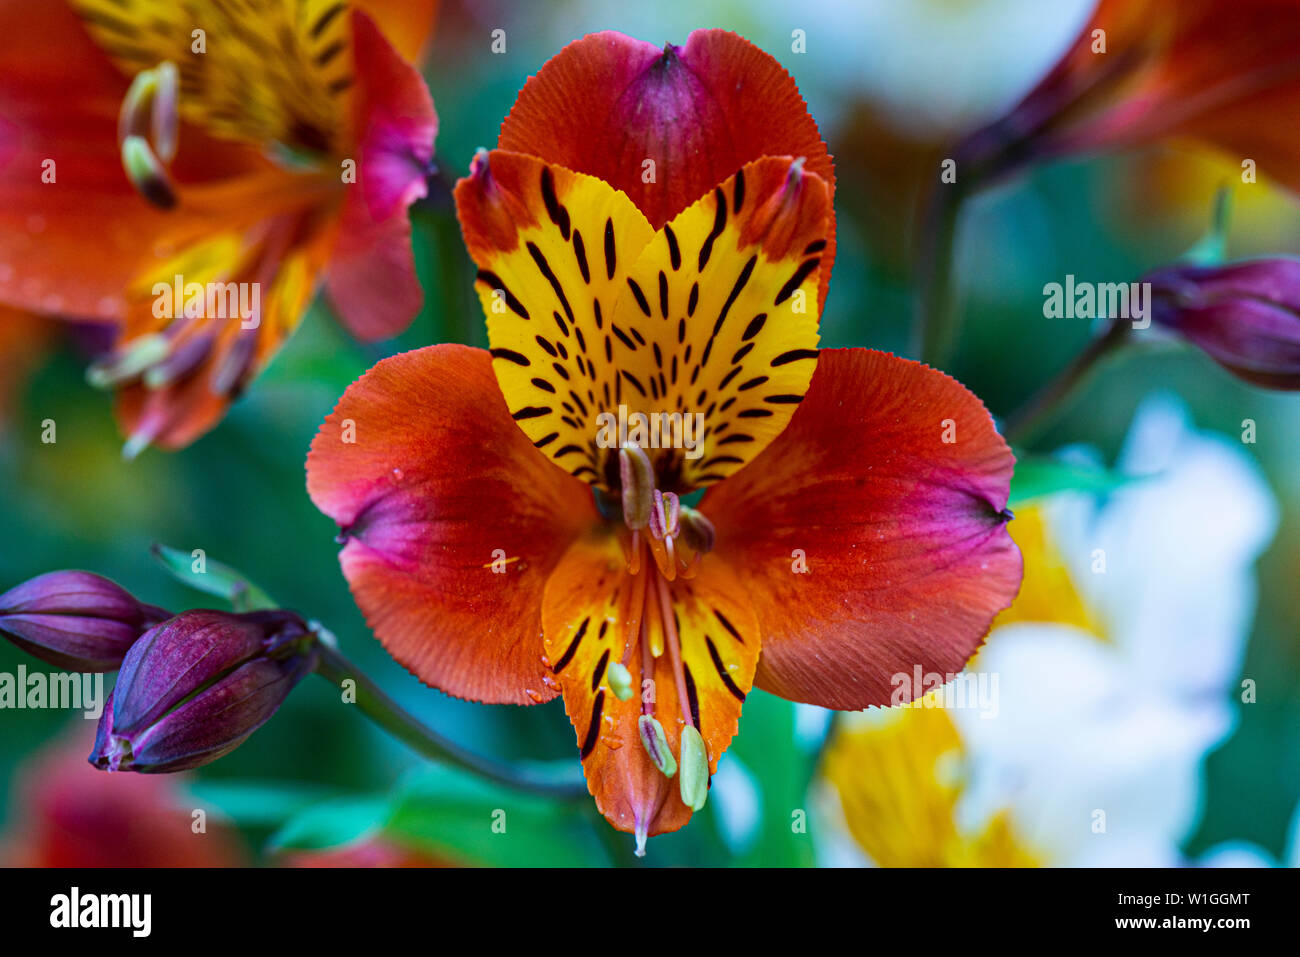 The flower of an Peruvian lily (Alstroemeria) Stock Photo